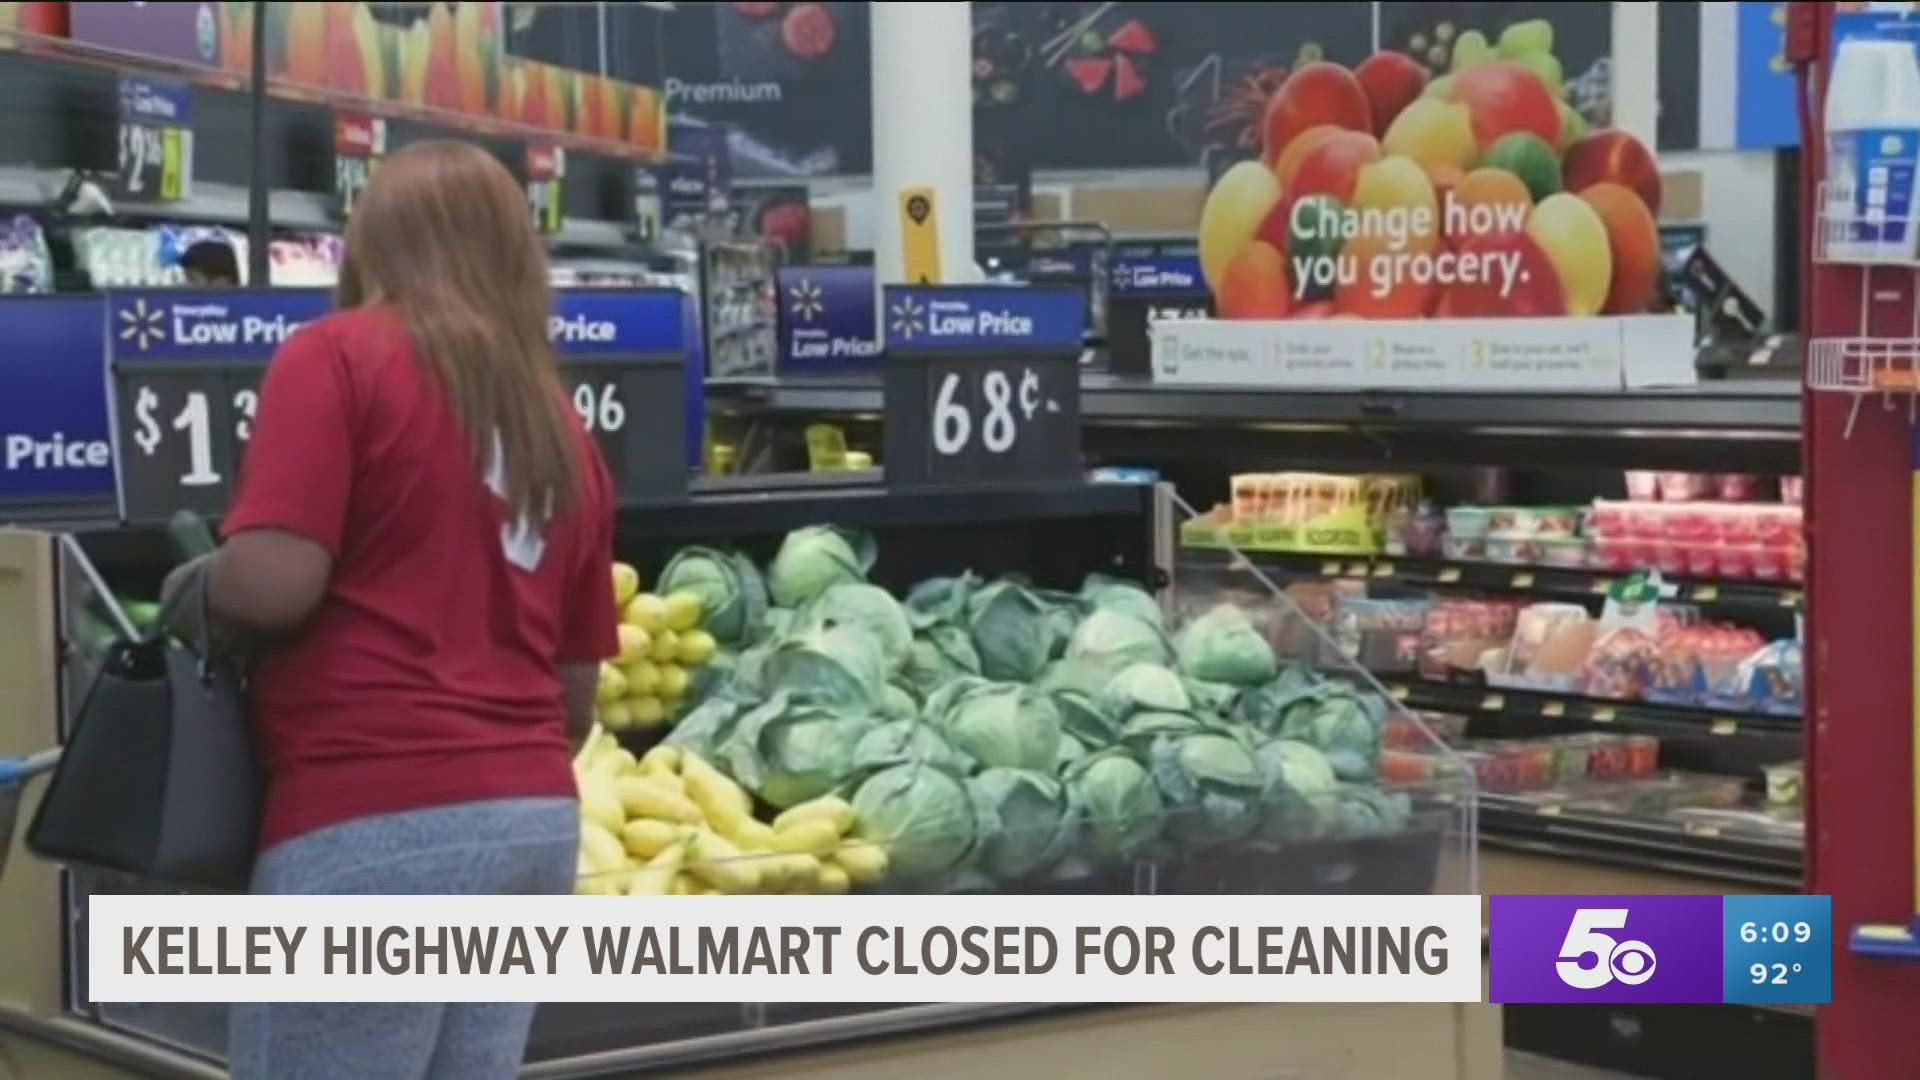 Walmart says this is part of their company-initiated program to allow third-party cleaning crews time to thoroughly clean and sanitize the building.